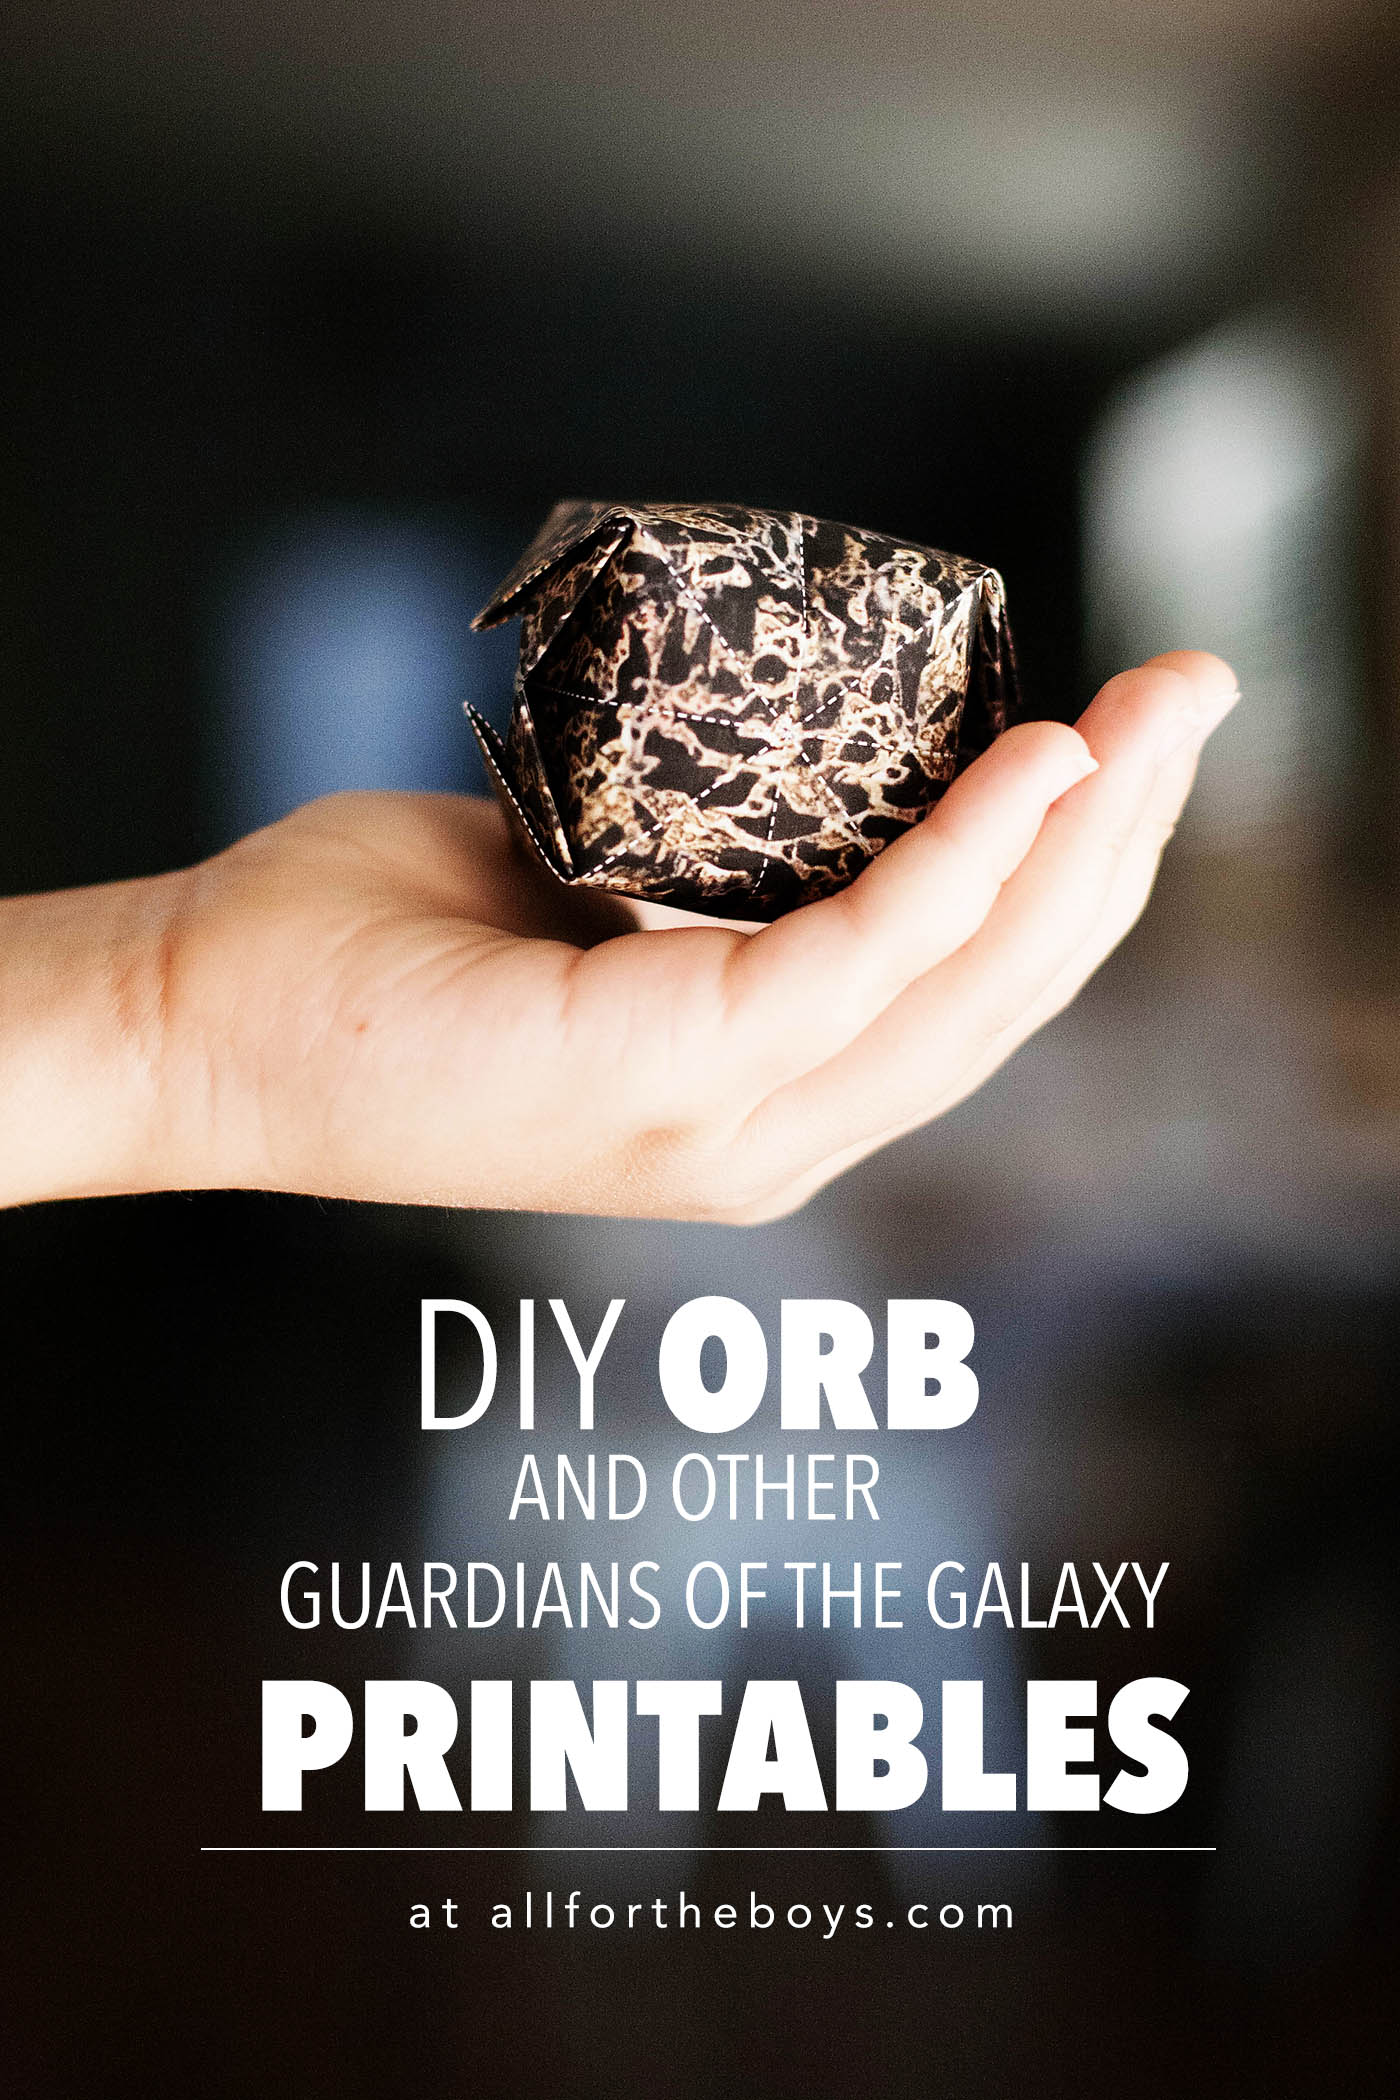 DIY Orb and other Guardians of the Galaxy printables